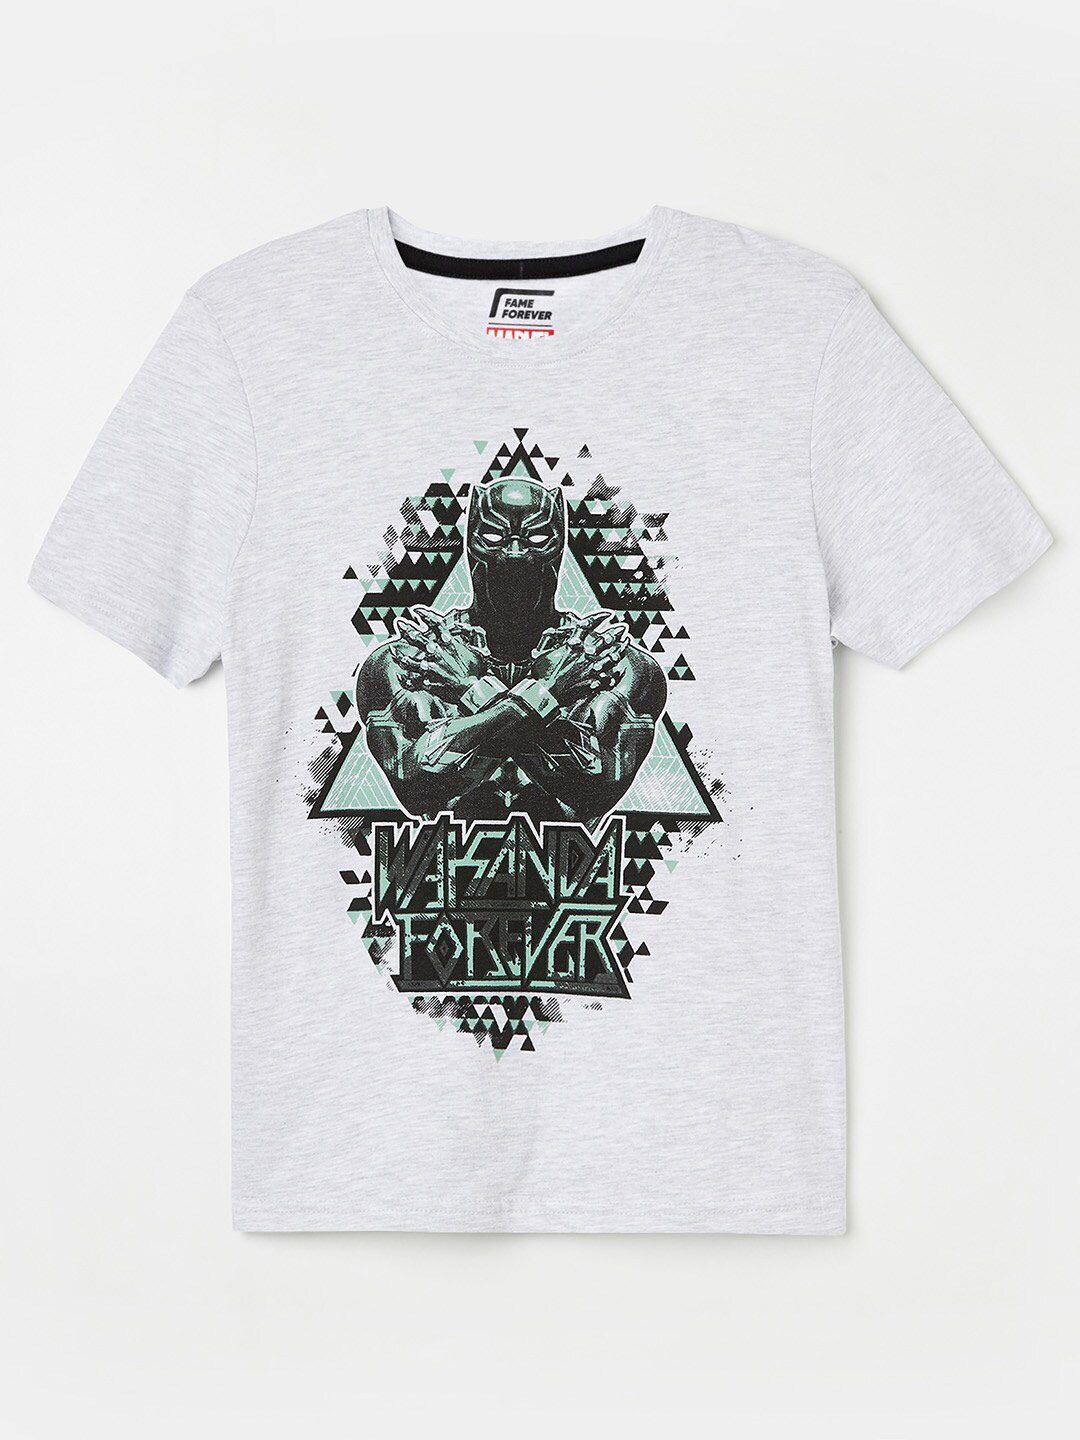 fame-forever-by-lifestyle-boys-grey-printed-t-shirt